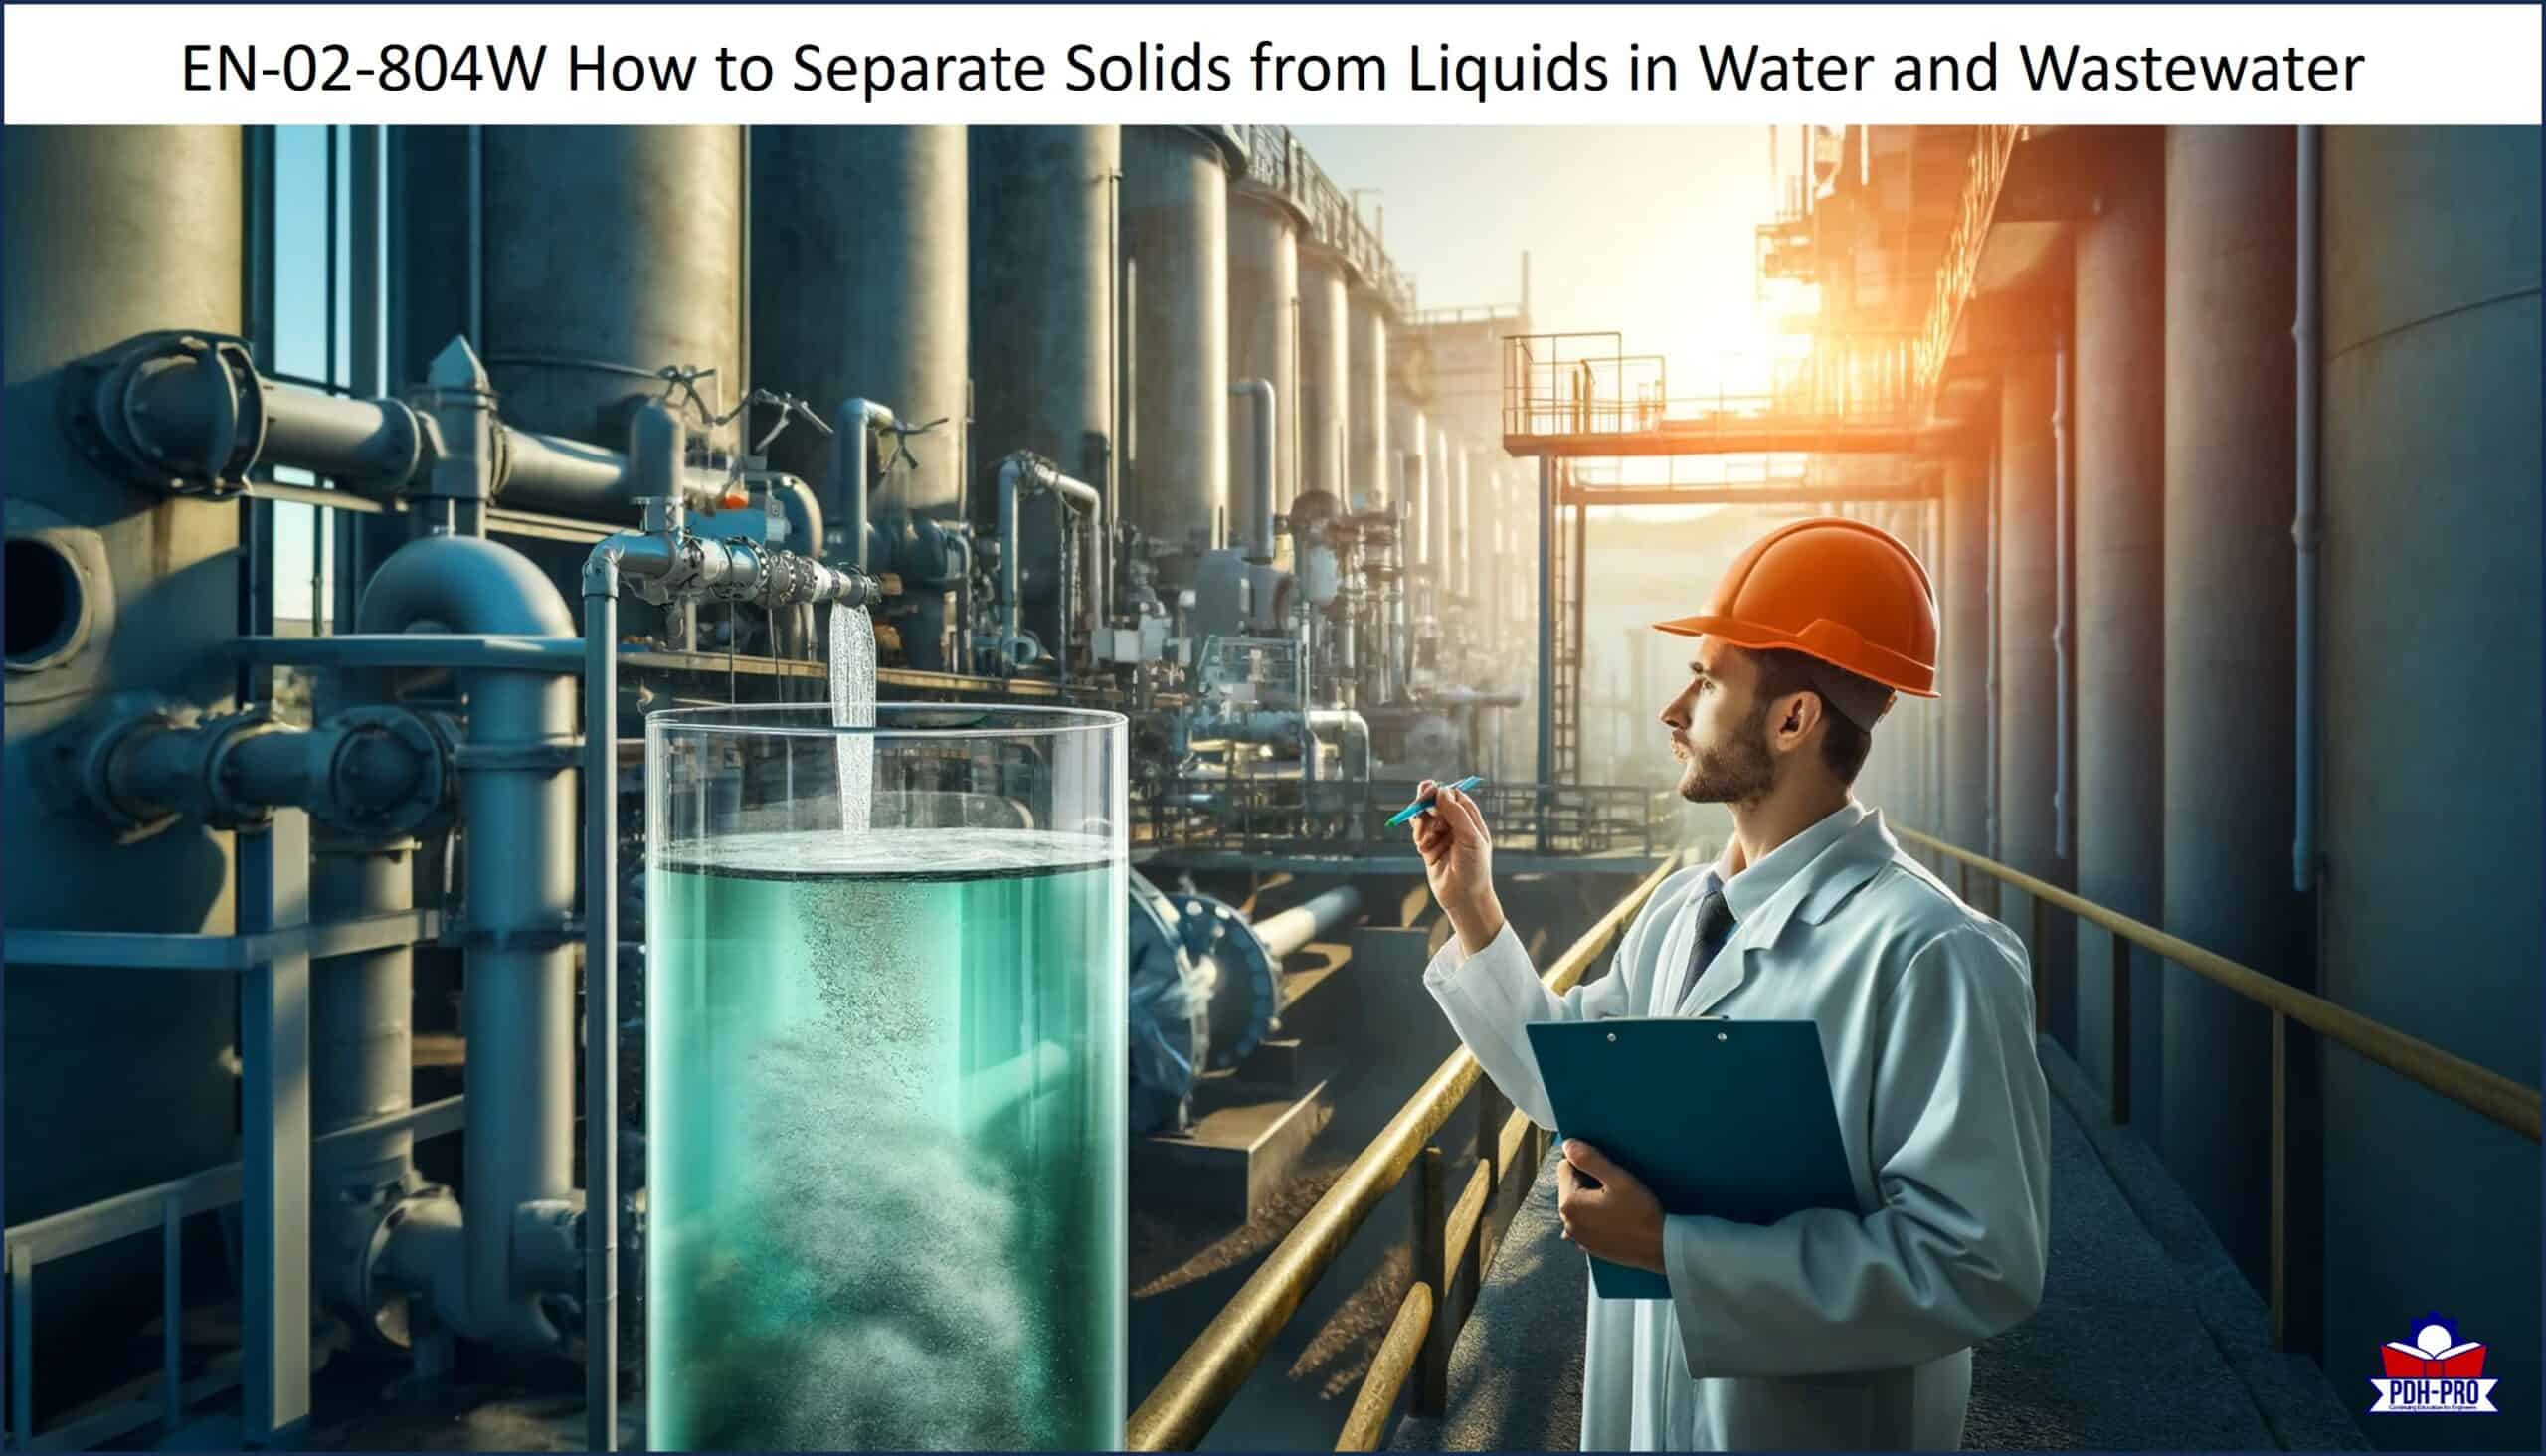 How to Separate Solids from Liquids in Water and Wastewater